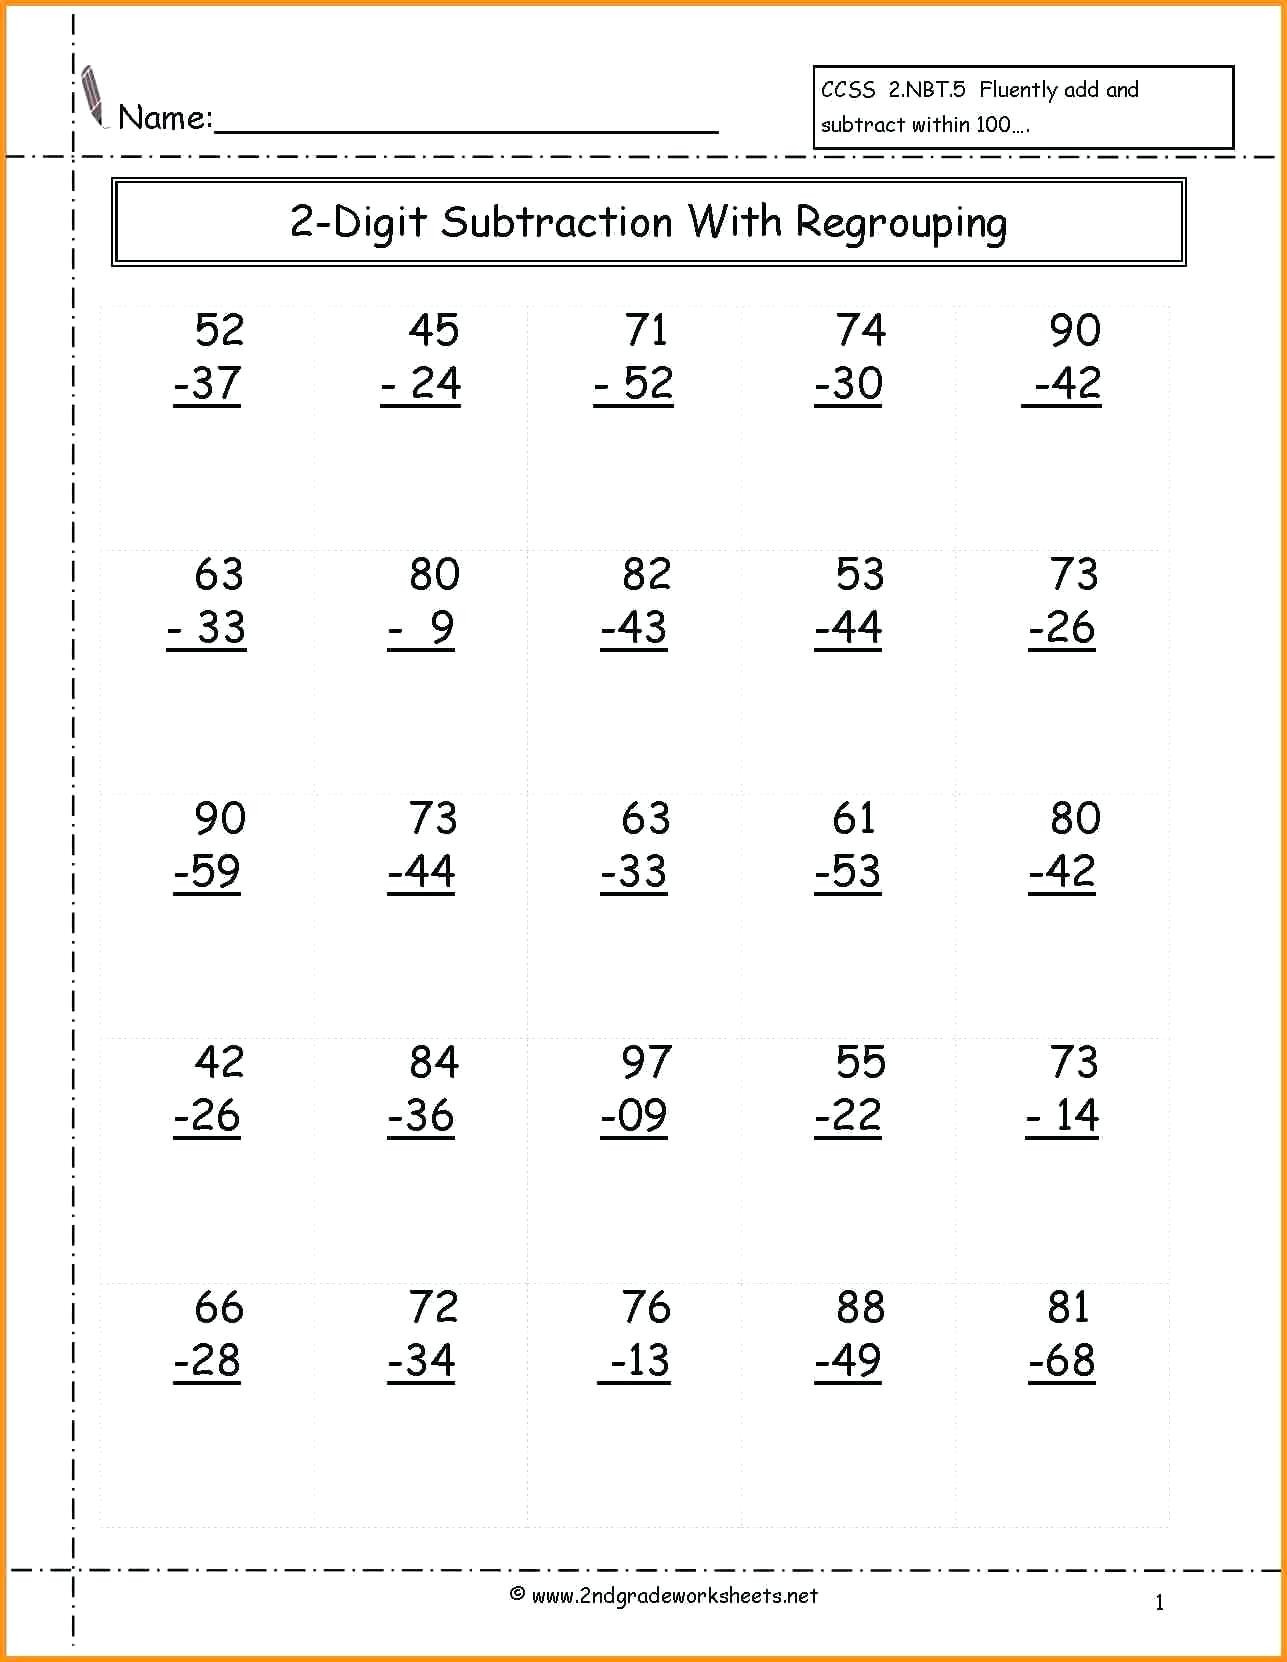 Free Math Worksheets First Grade 1 Subtraction Subtract 1 Digit From 2 Digit No Regrouping